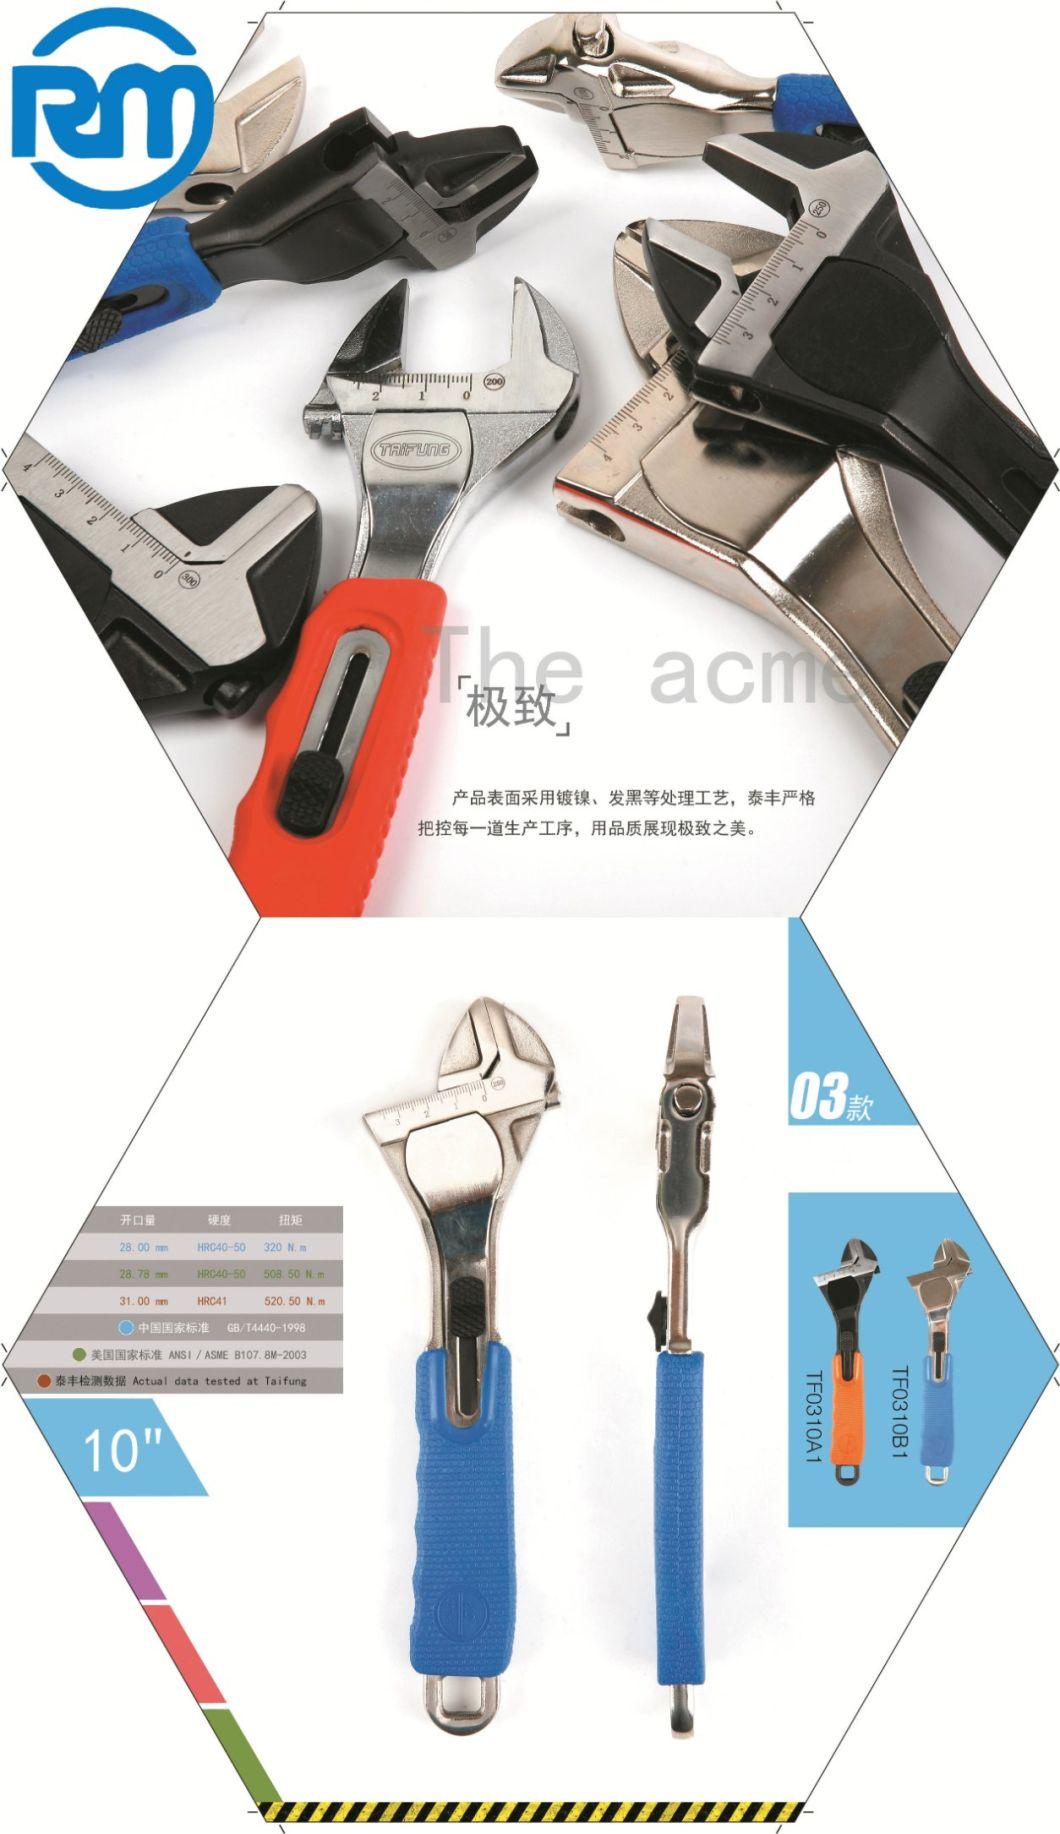 Custom Ratchet Flex Head Combination Wrench Easily Push and Pull Strictly Controlled Professional Quality Sliding Adjusting Button